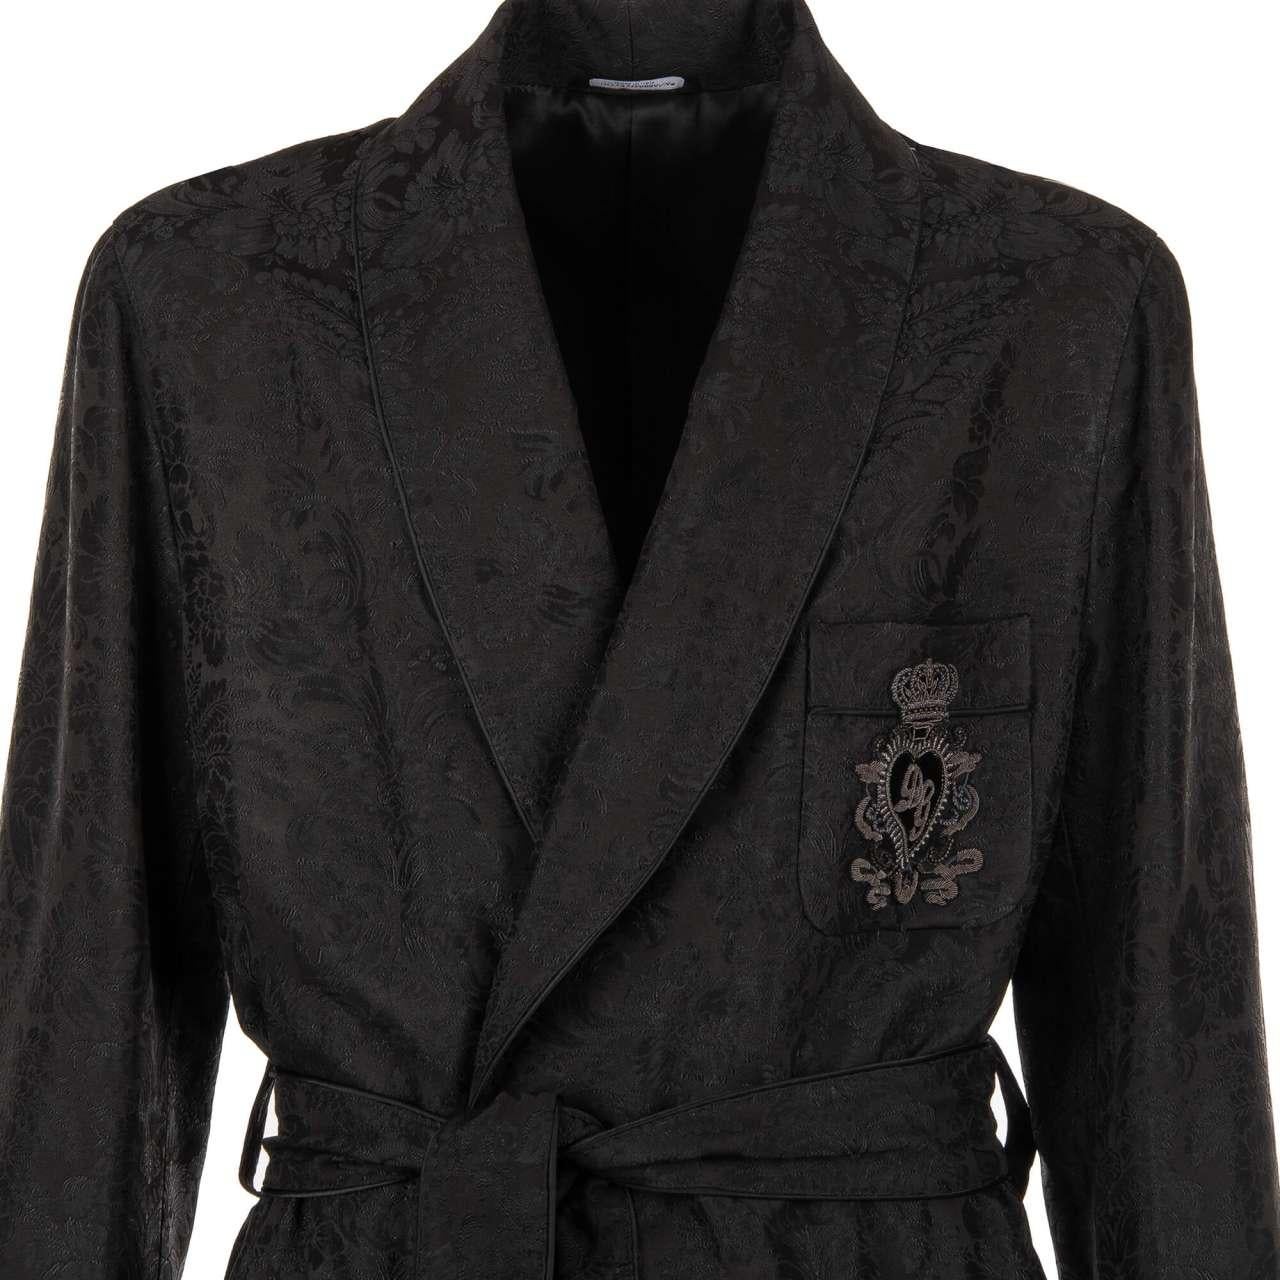 D&G Floral Jacquard Robe Blazer with DG Heart Crown Embroidery Black 46 For Sale 3